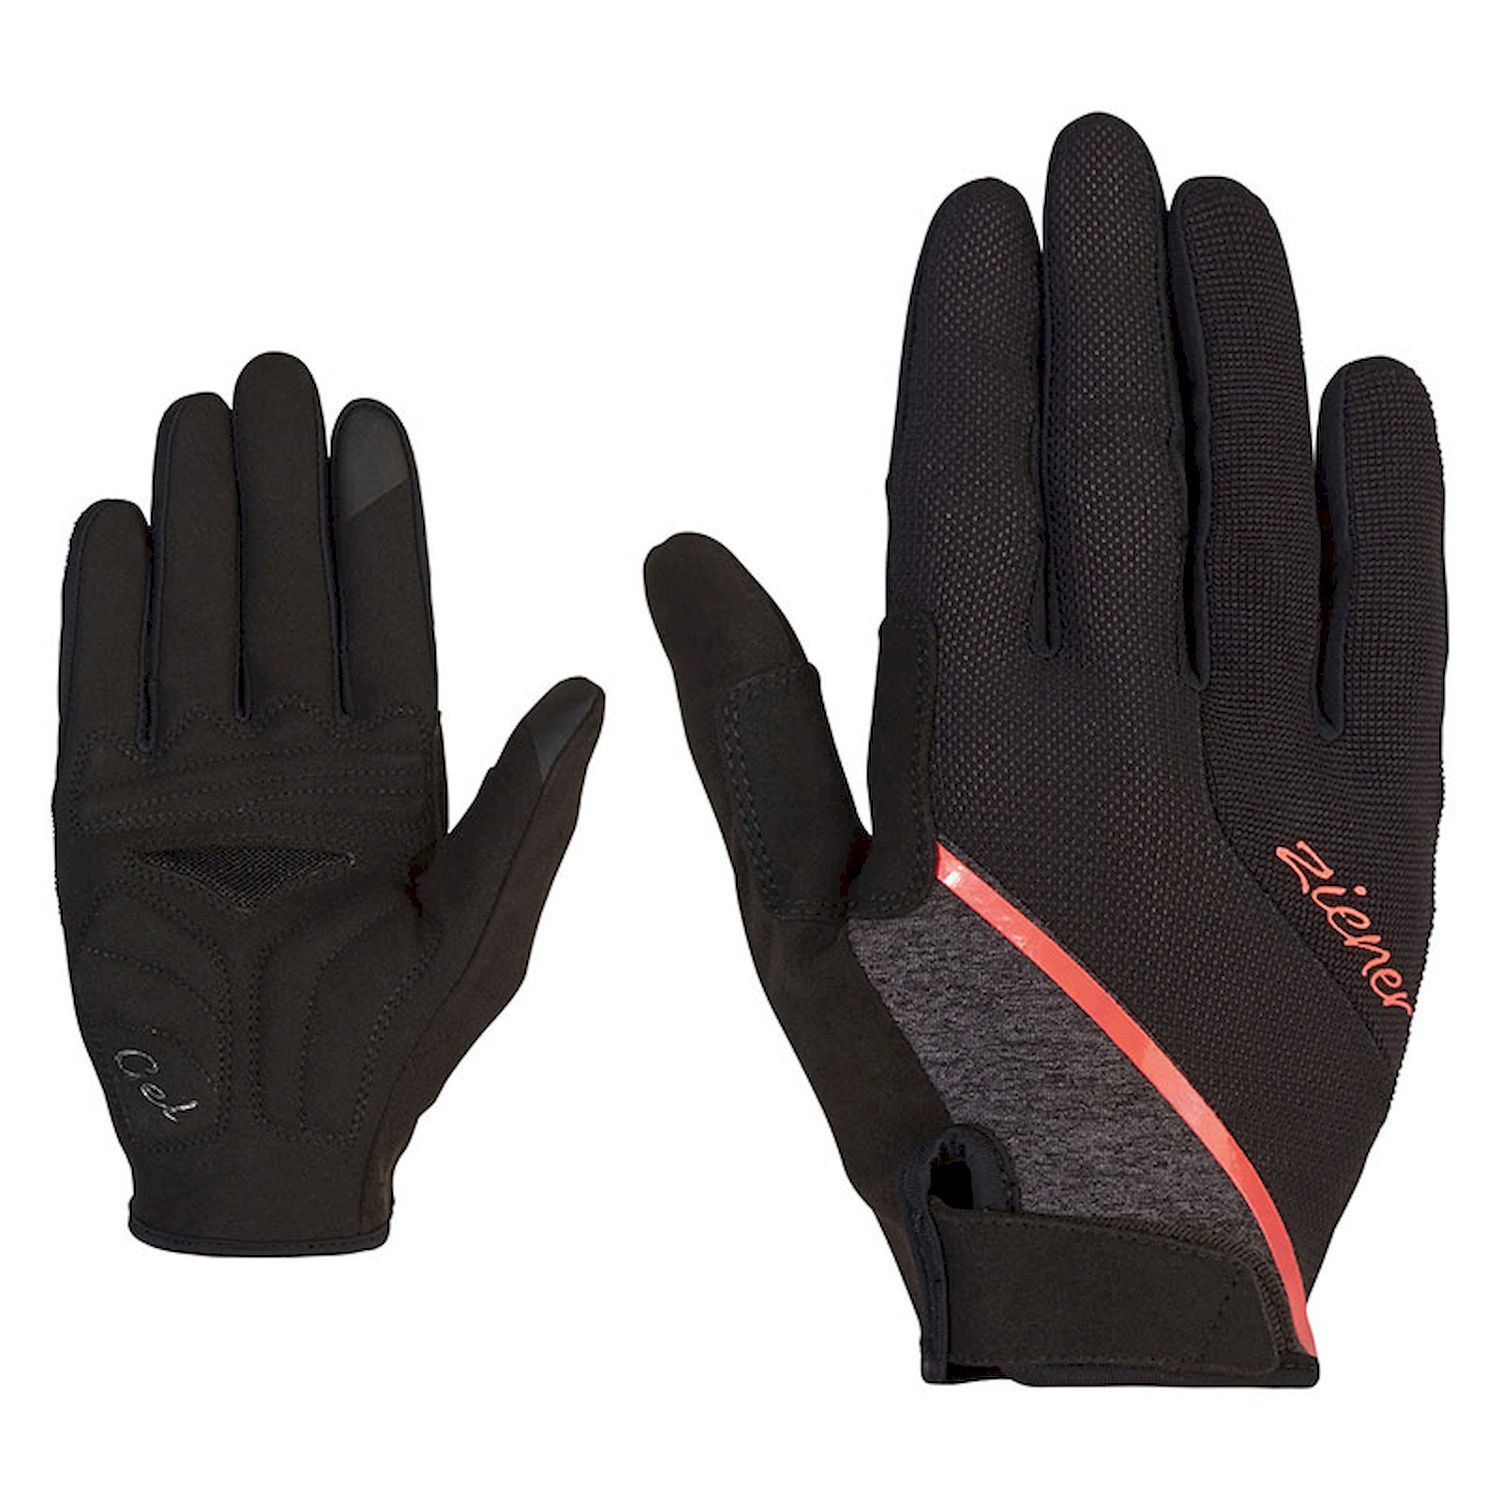 Ziener Calyta Touch Long Lady - Guantes ciclismo - Mujer